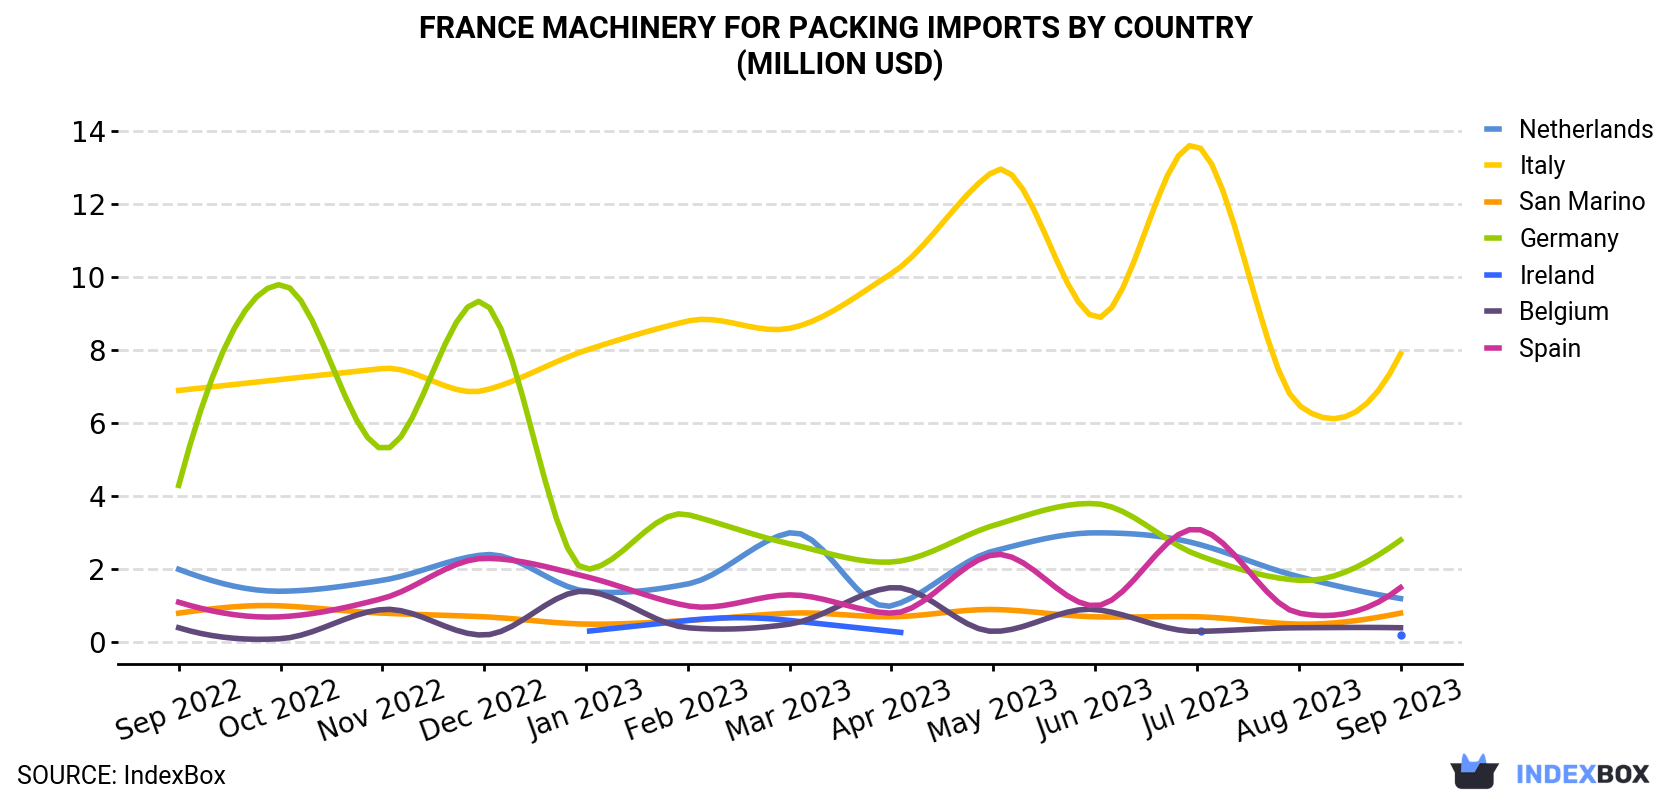 France Machinery For Packing Imports By Country (Million USD)